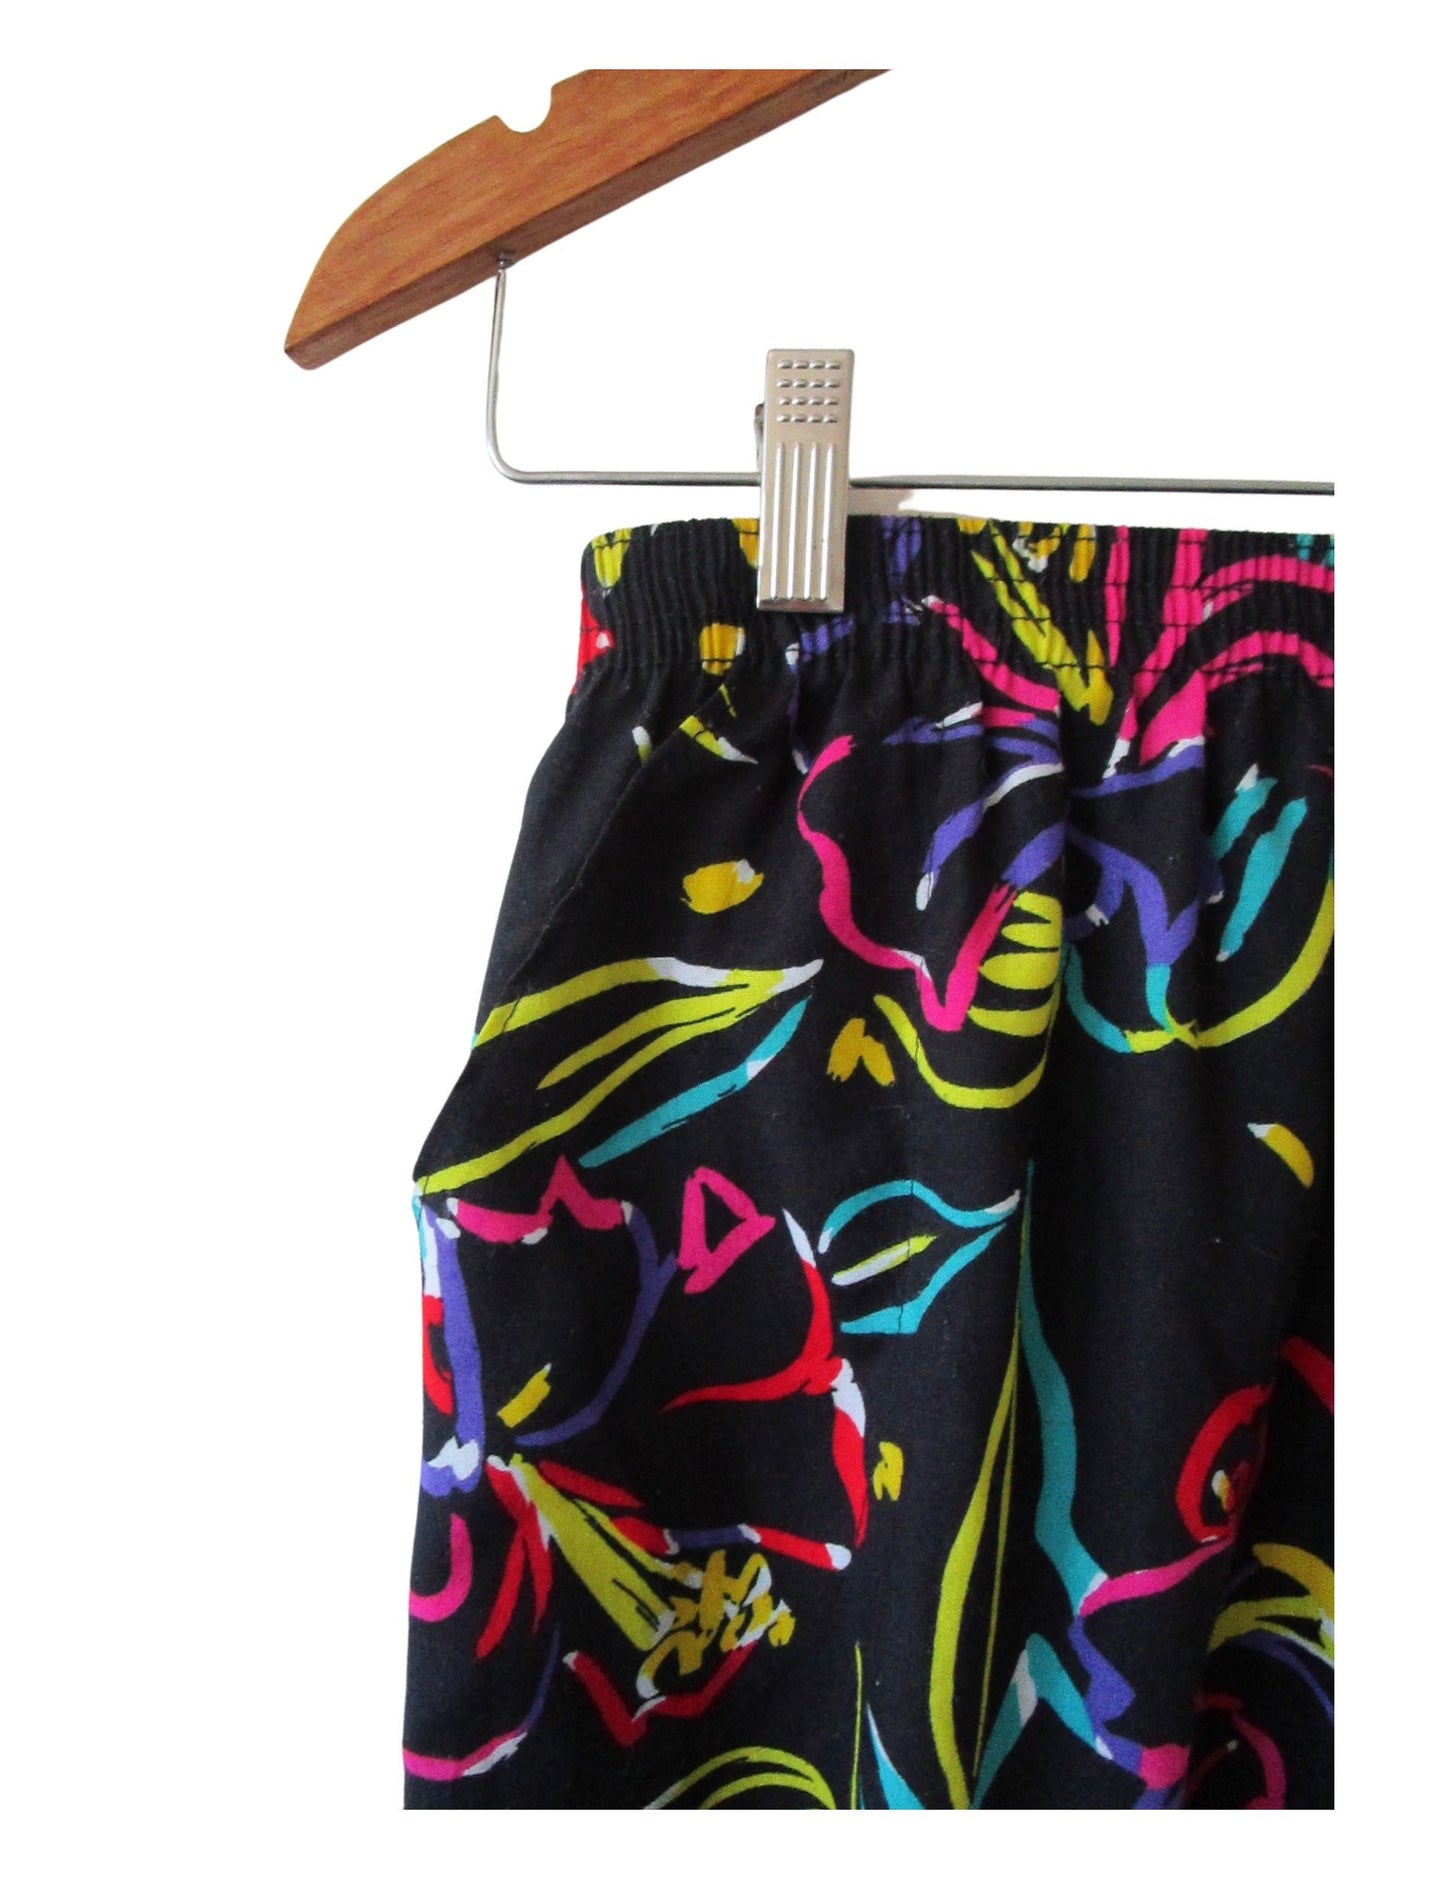 Wms Vintage 1990's RAINBOW FLORAL Grunge Flowy Booth Bay Mid Calf Skirt with POCKETS Size 9/10